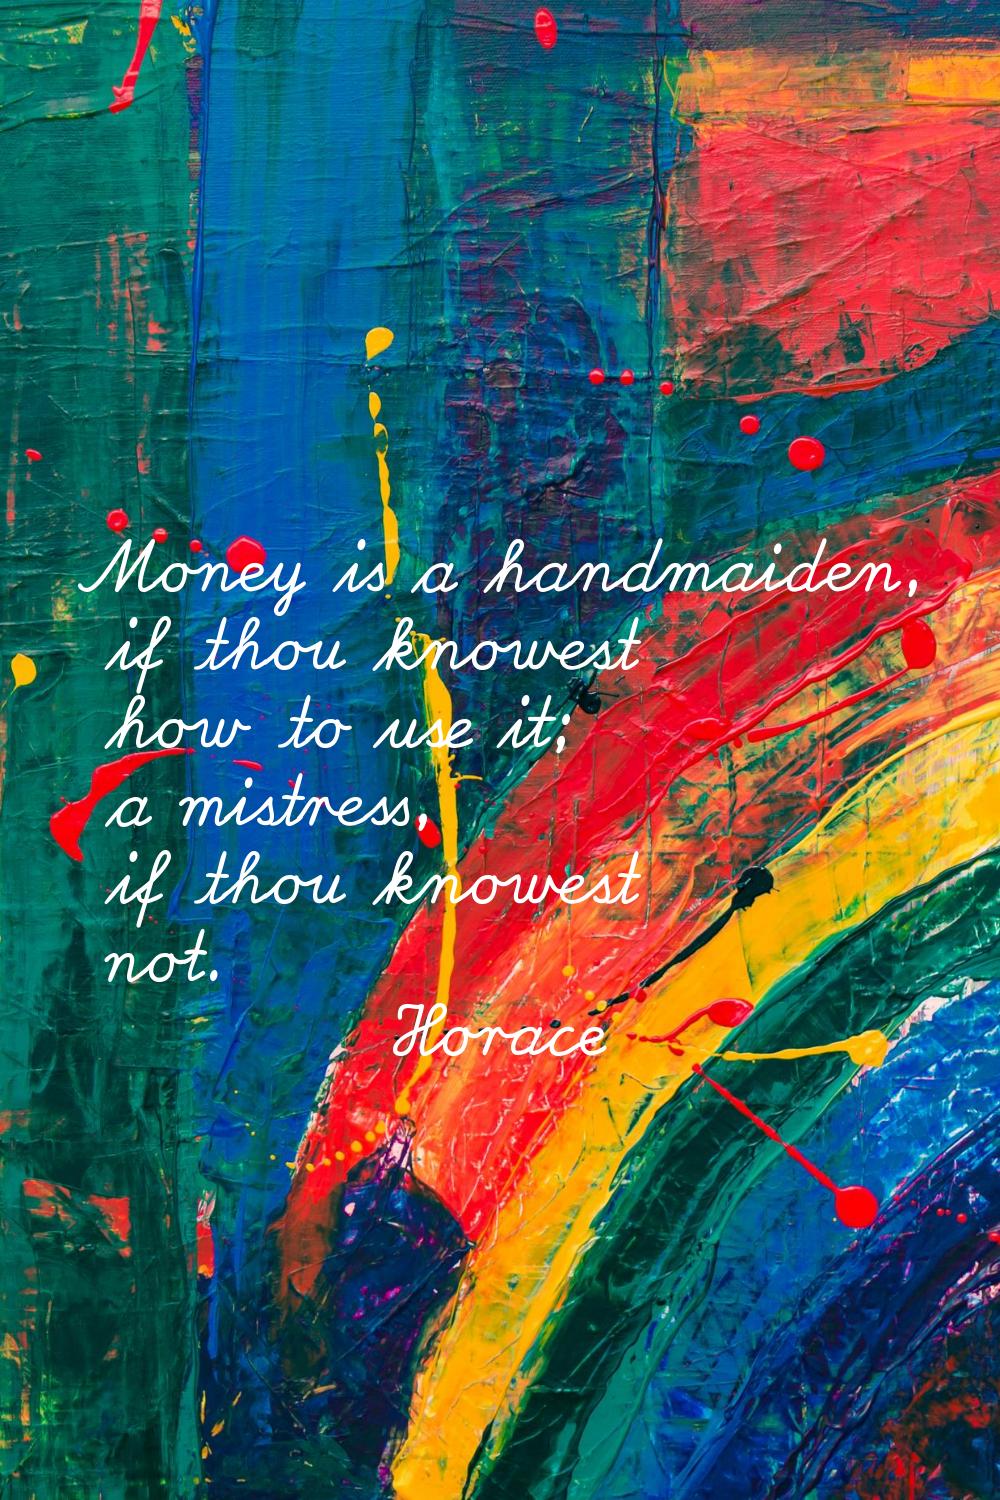 Money is a handmaiden, if thou knowest how to use it; a mistress, if thou knowest not.